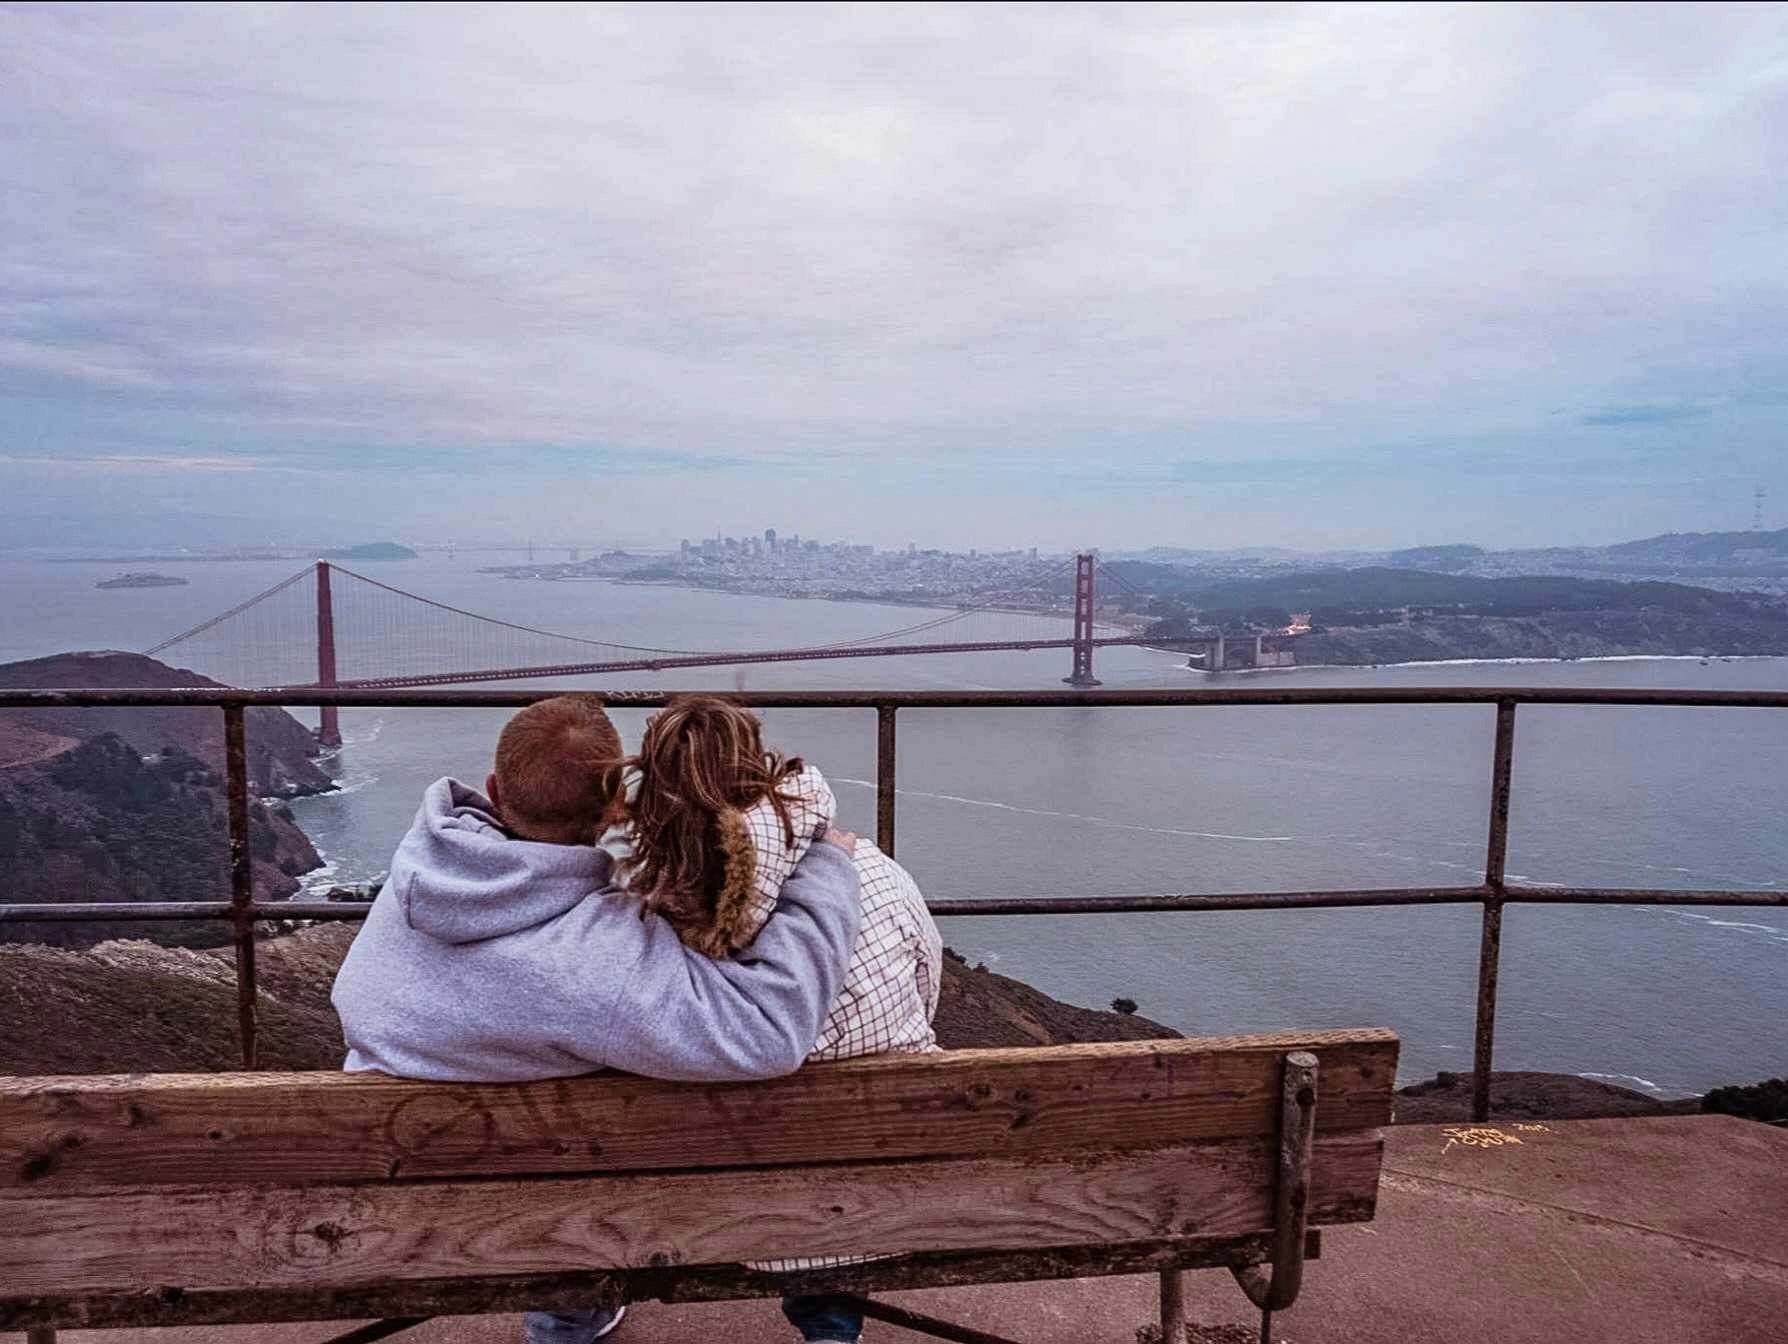 man and woman overlooking the Golden Gate Bridge in San Francisco